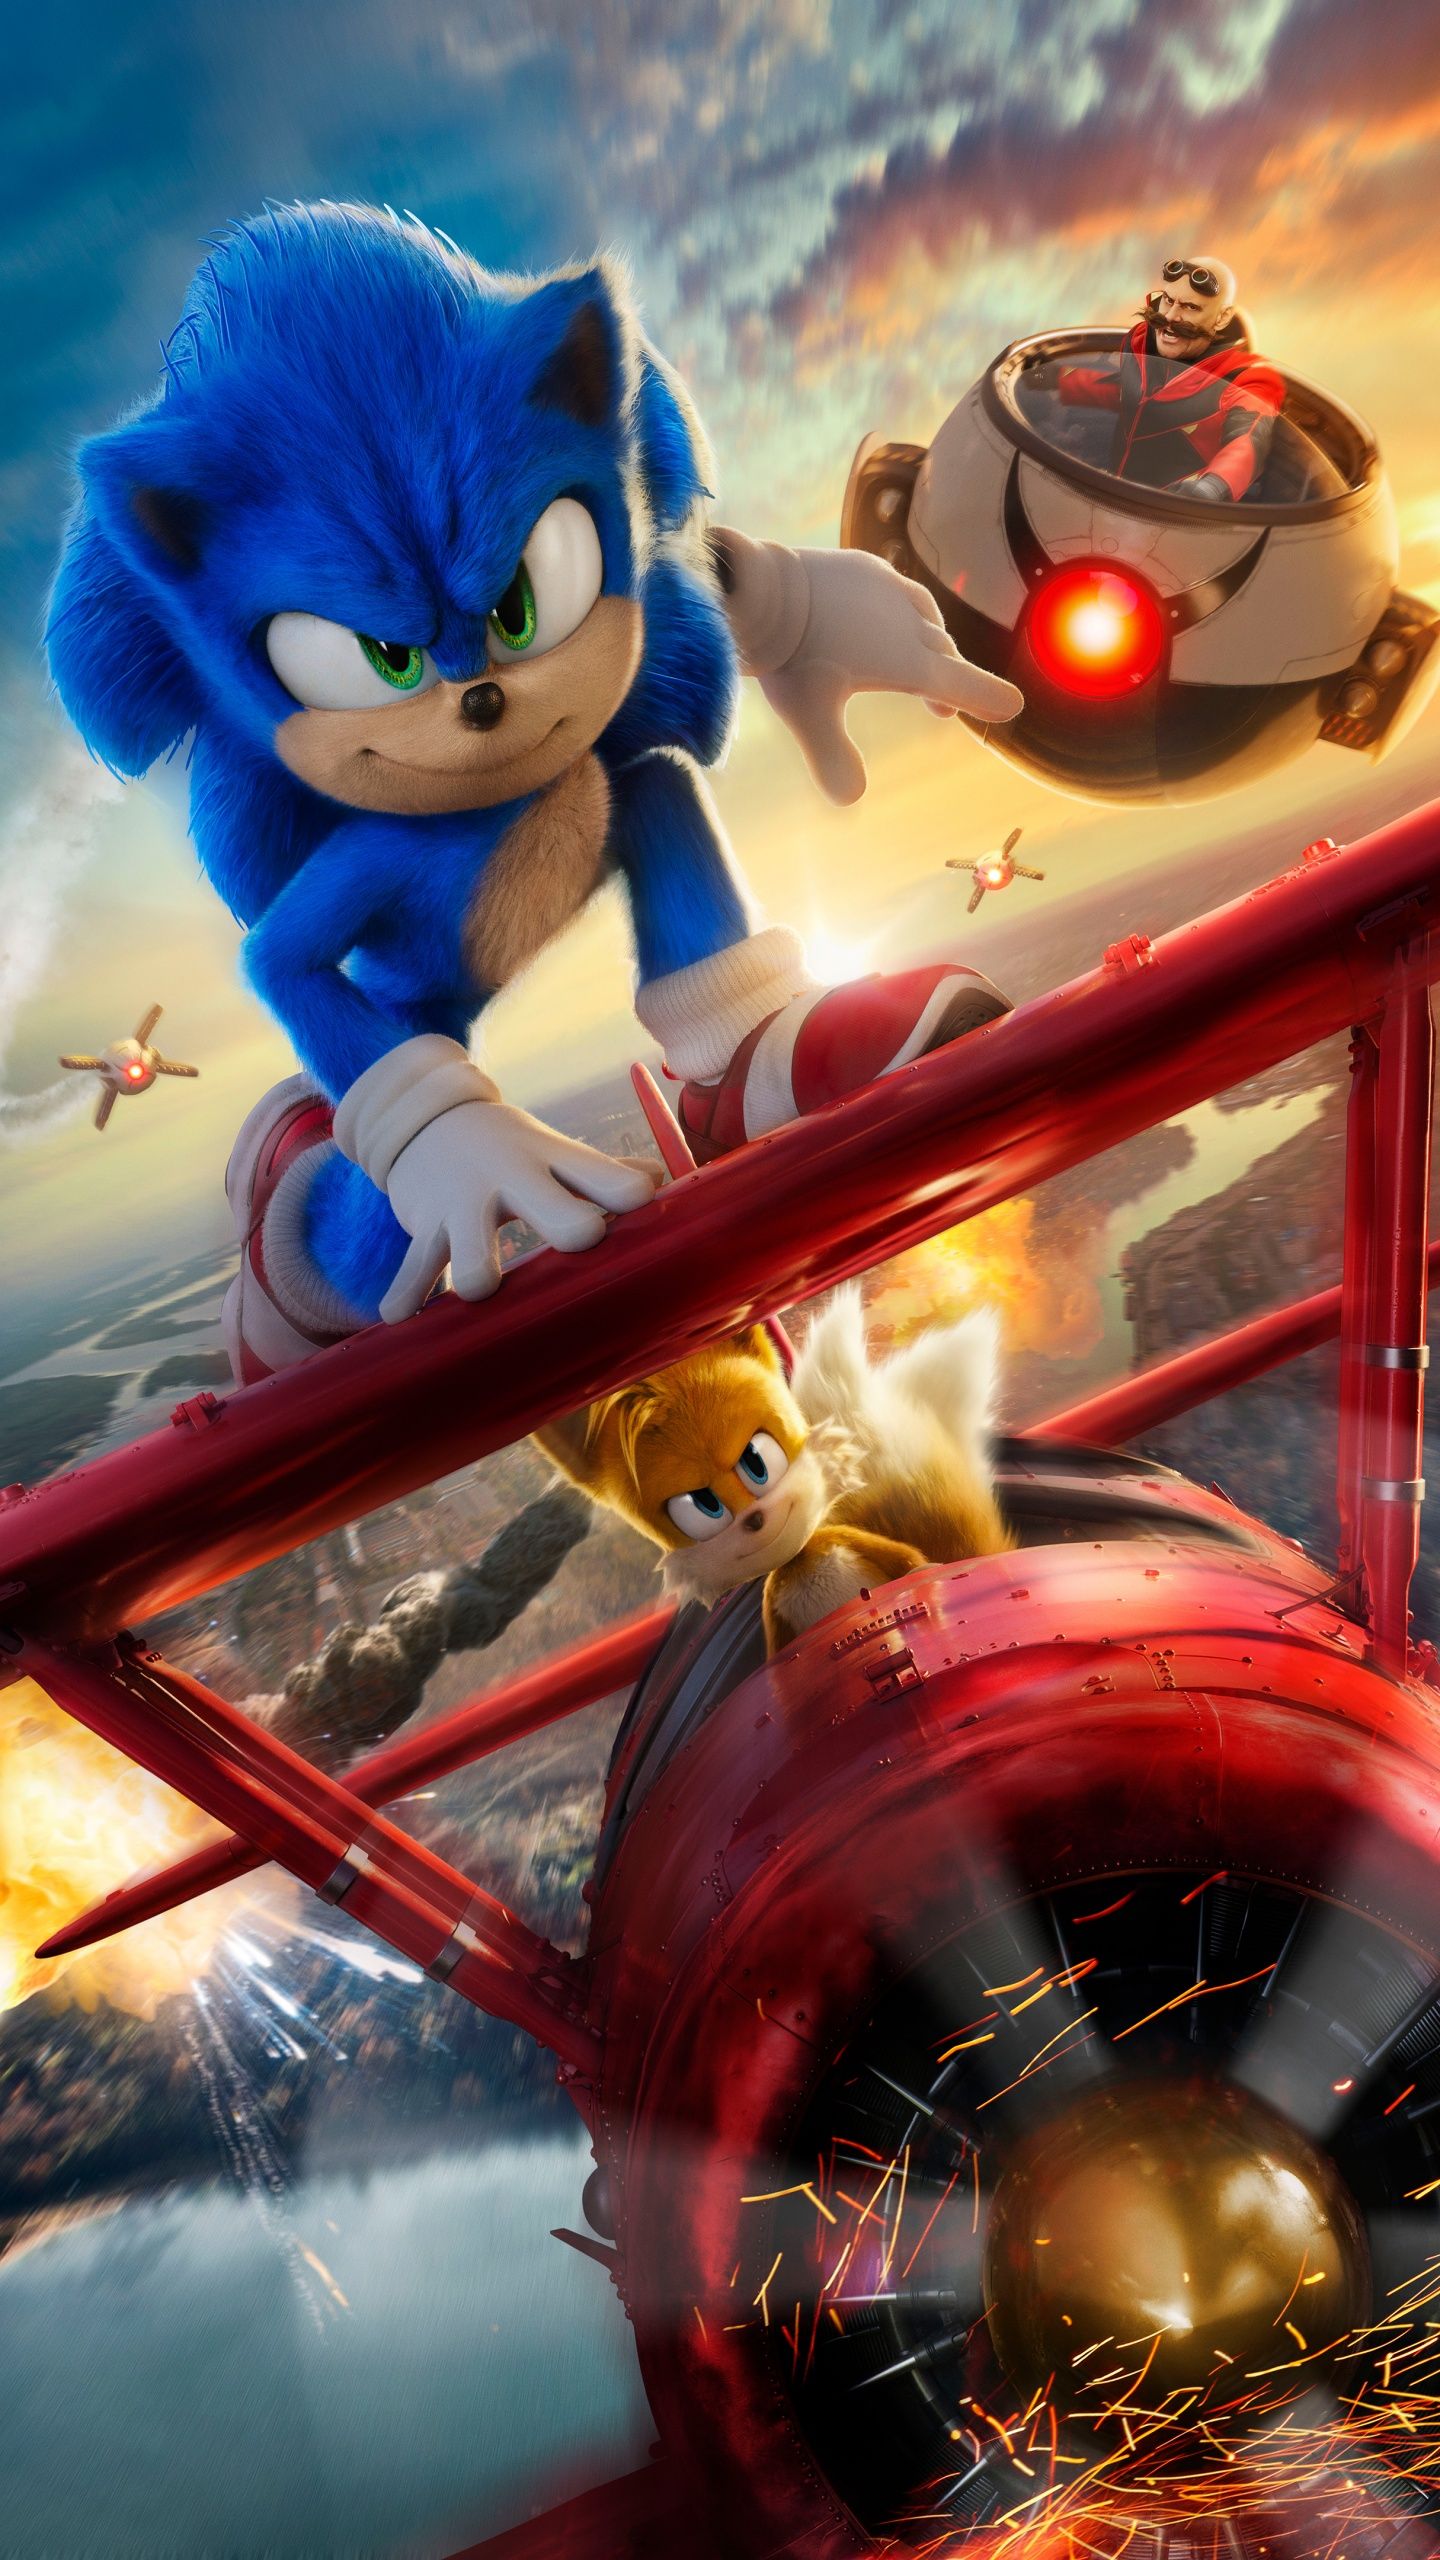 A sonic the hedgehog movie poster with two characters - Sonic